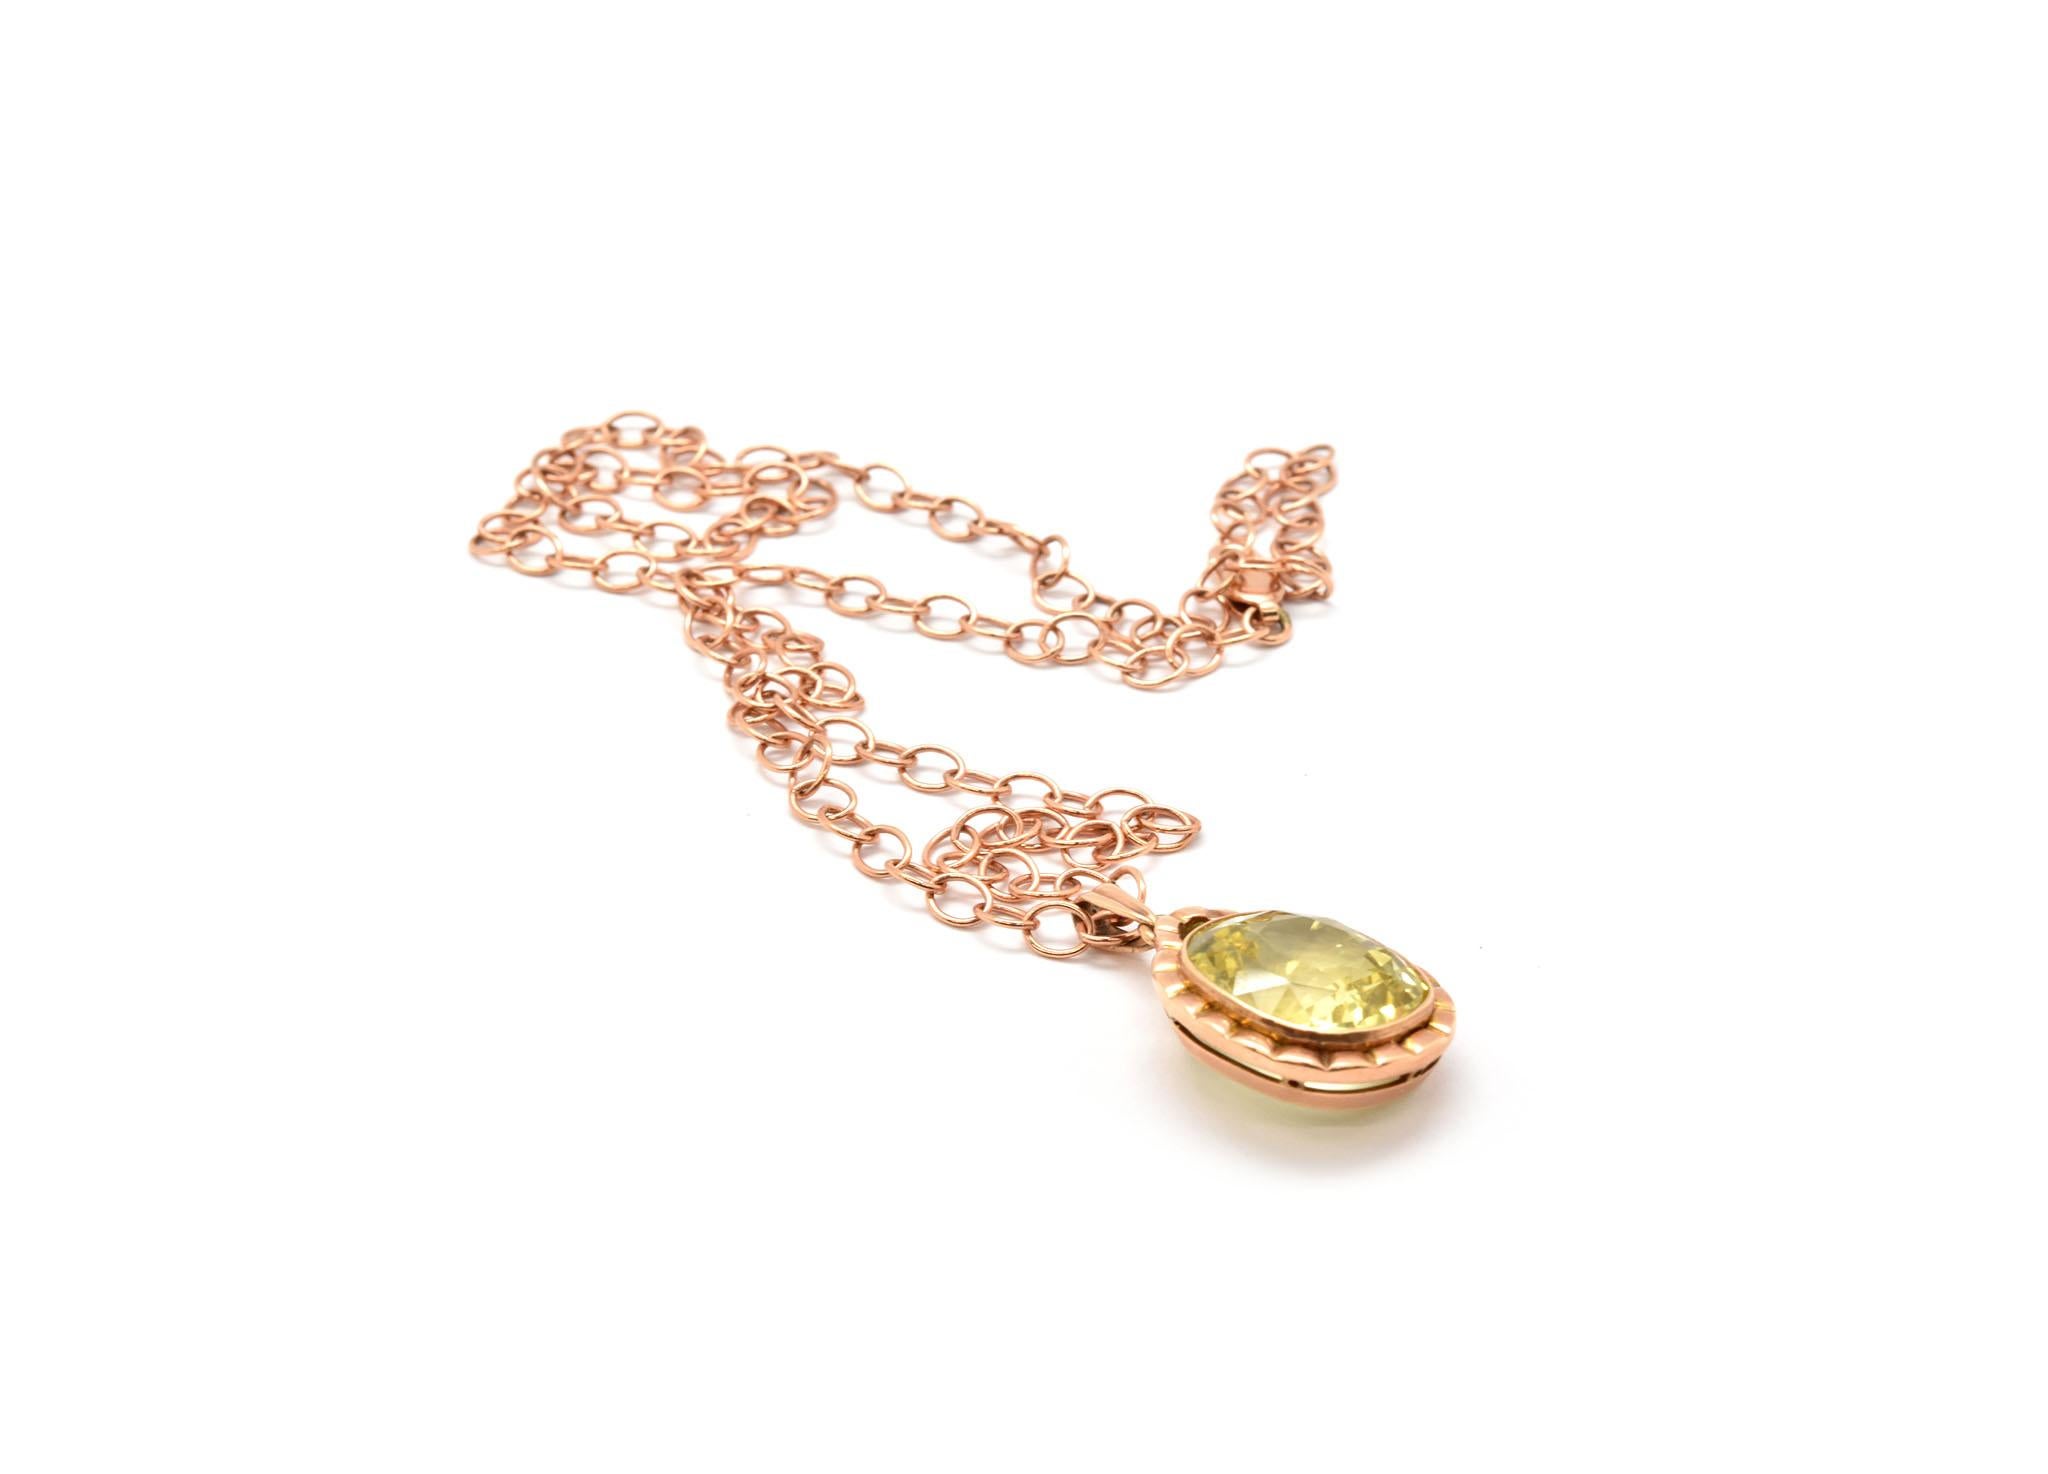 A stunning lemon quartz stone is set into a 14k rose gold pendant setting. The quartz measures 13x15mm, and the pendant measures 29x17mm. The pendant slides along a 14k rose gold chain that measures about 18 inches in length. The necklace weighs